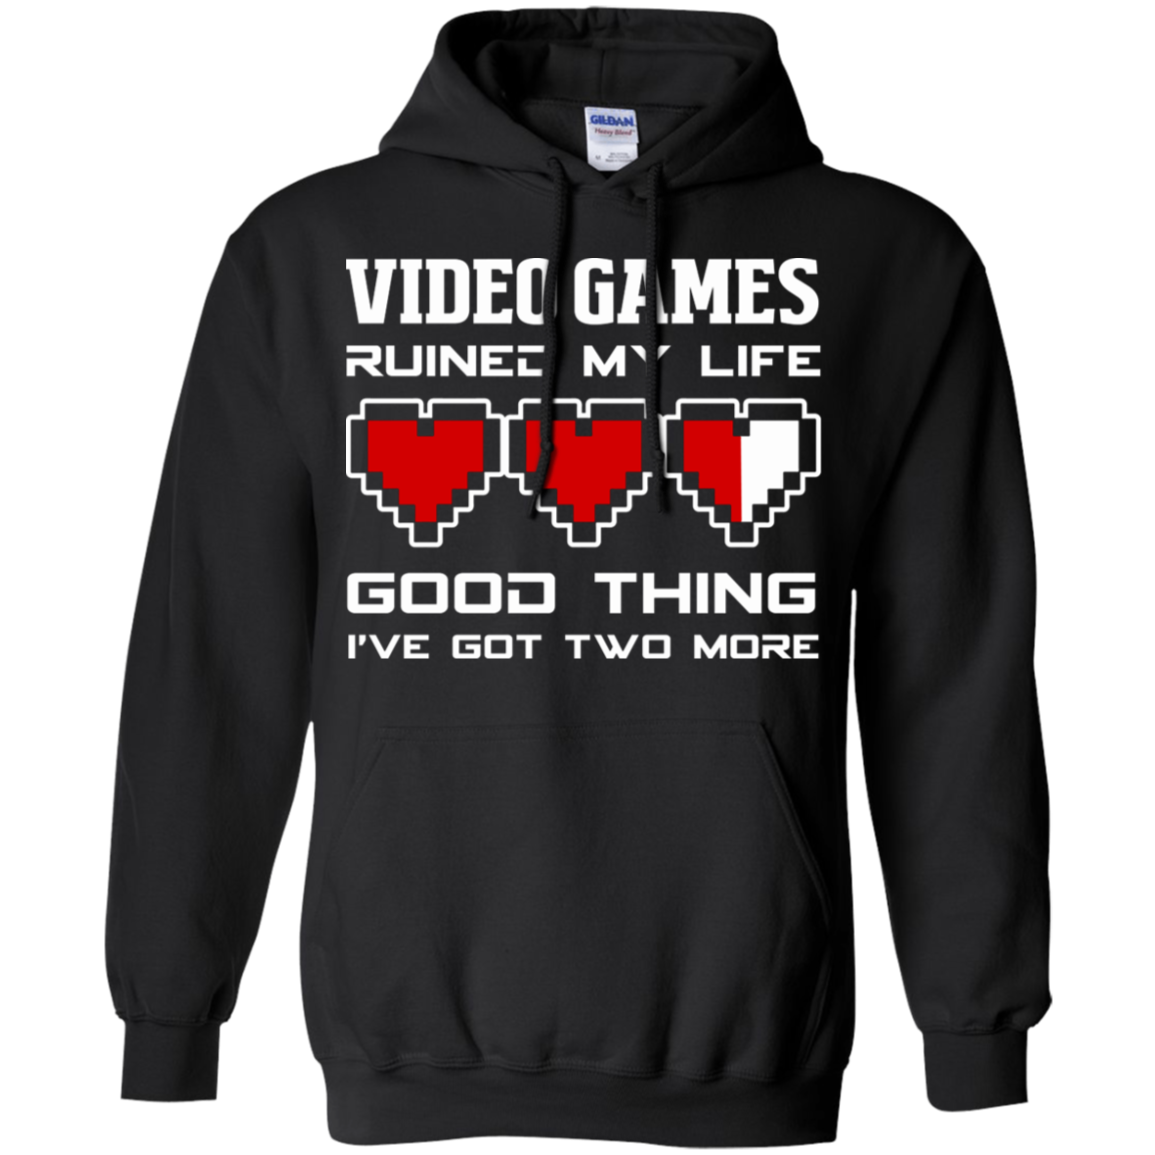 Video Games Ruined My Life - Video Gaming Pullover Hoodie 8 oz.